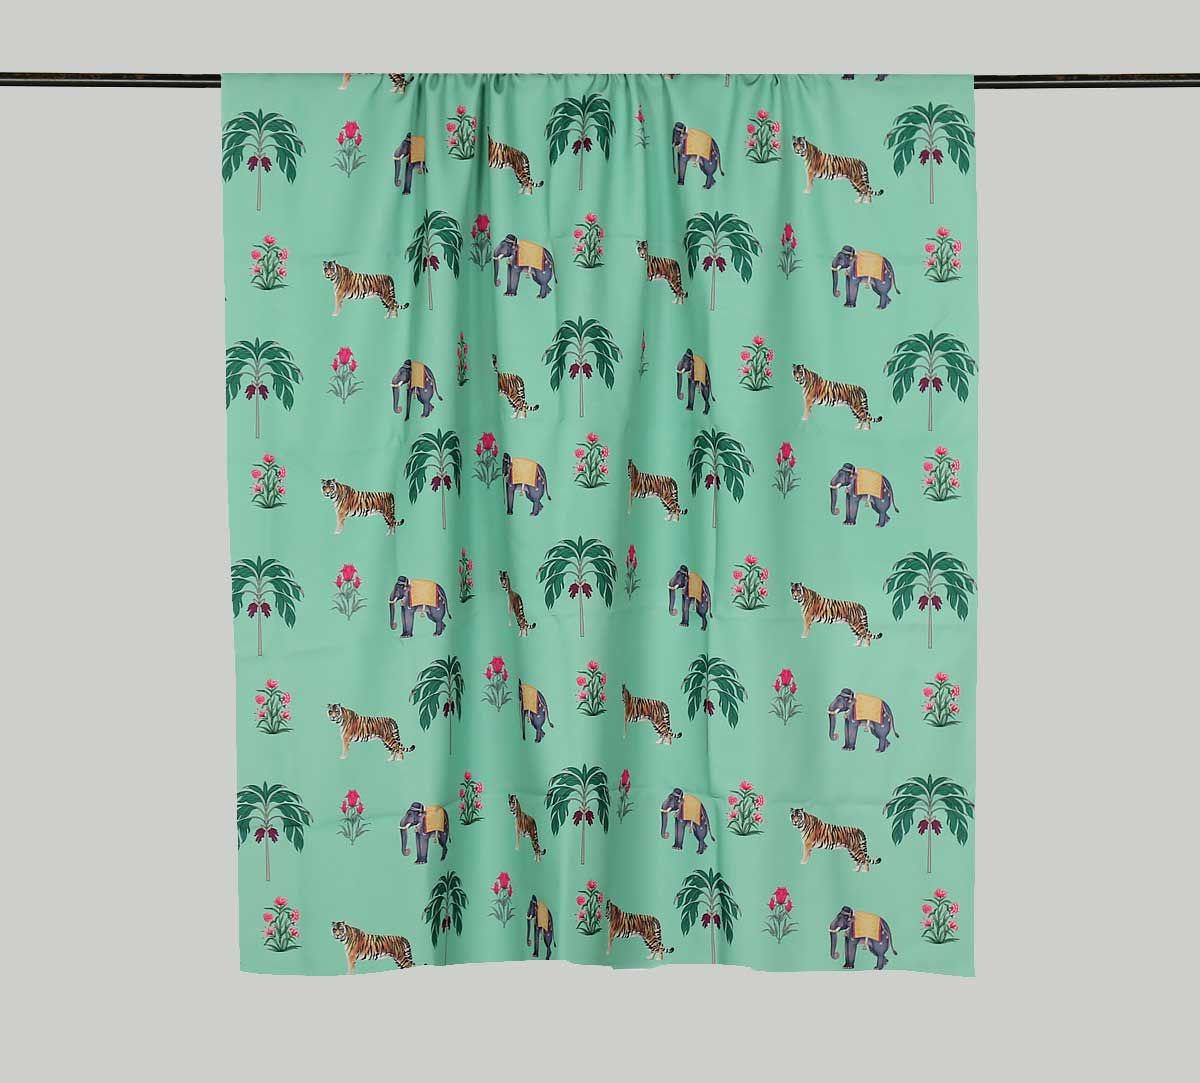 India Circus by Krsnaa Mehta Pistacho Poetic Disposition Fabric